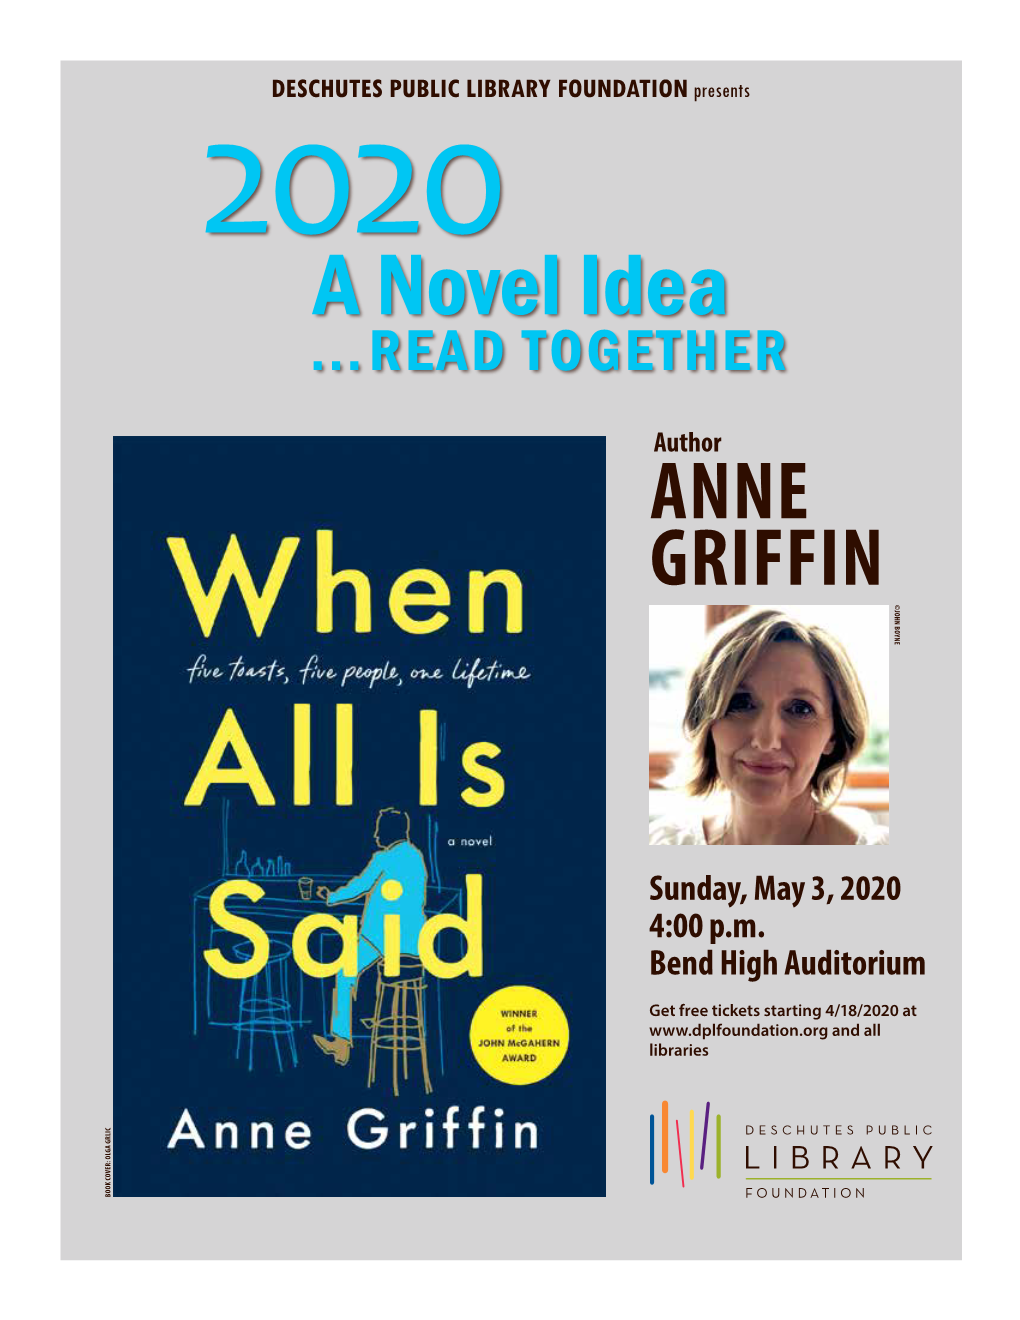 ANNE GRIFFIN Sunday, May 3, 2020 May Sunday, 4:00 P.M